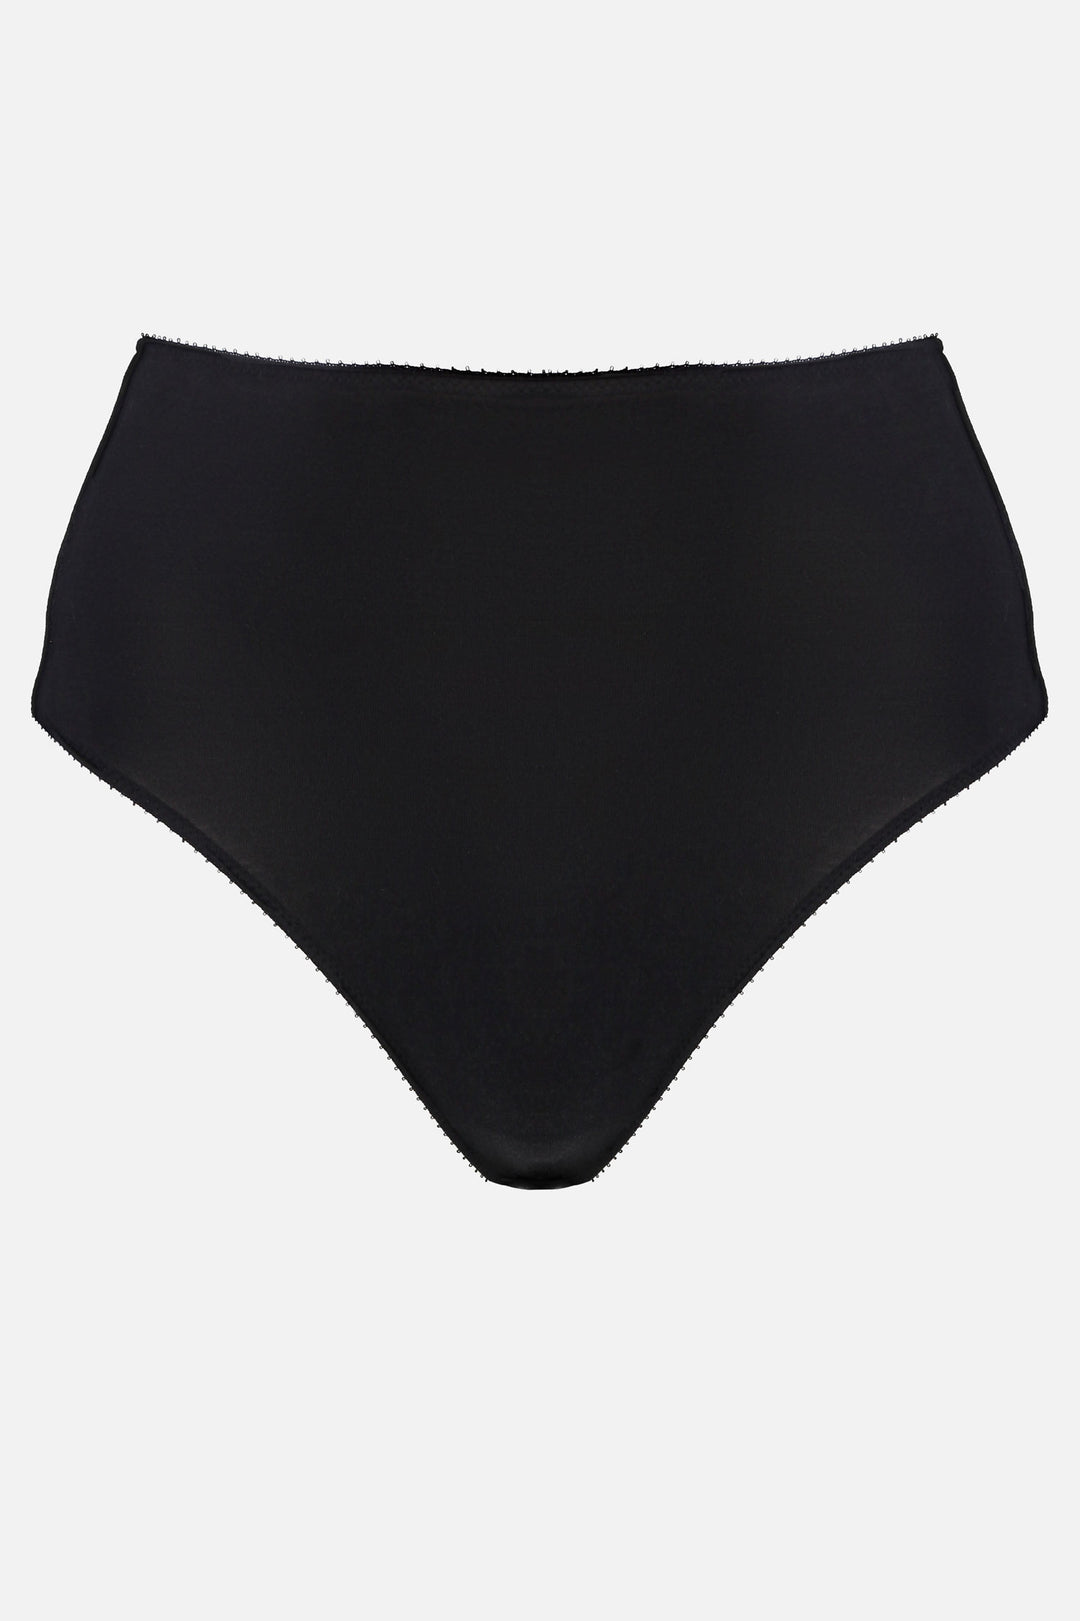 Videris Lingerie high waist knicker in black TENCEL™ cut to follow the natural curve of your hips